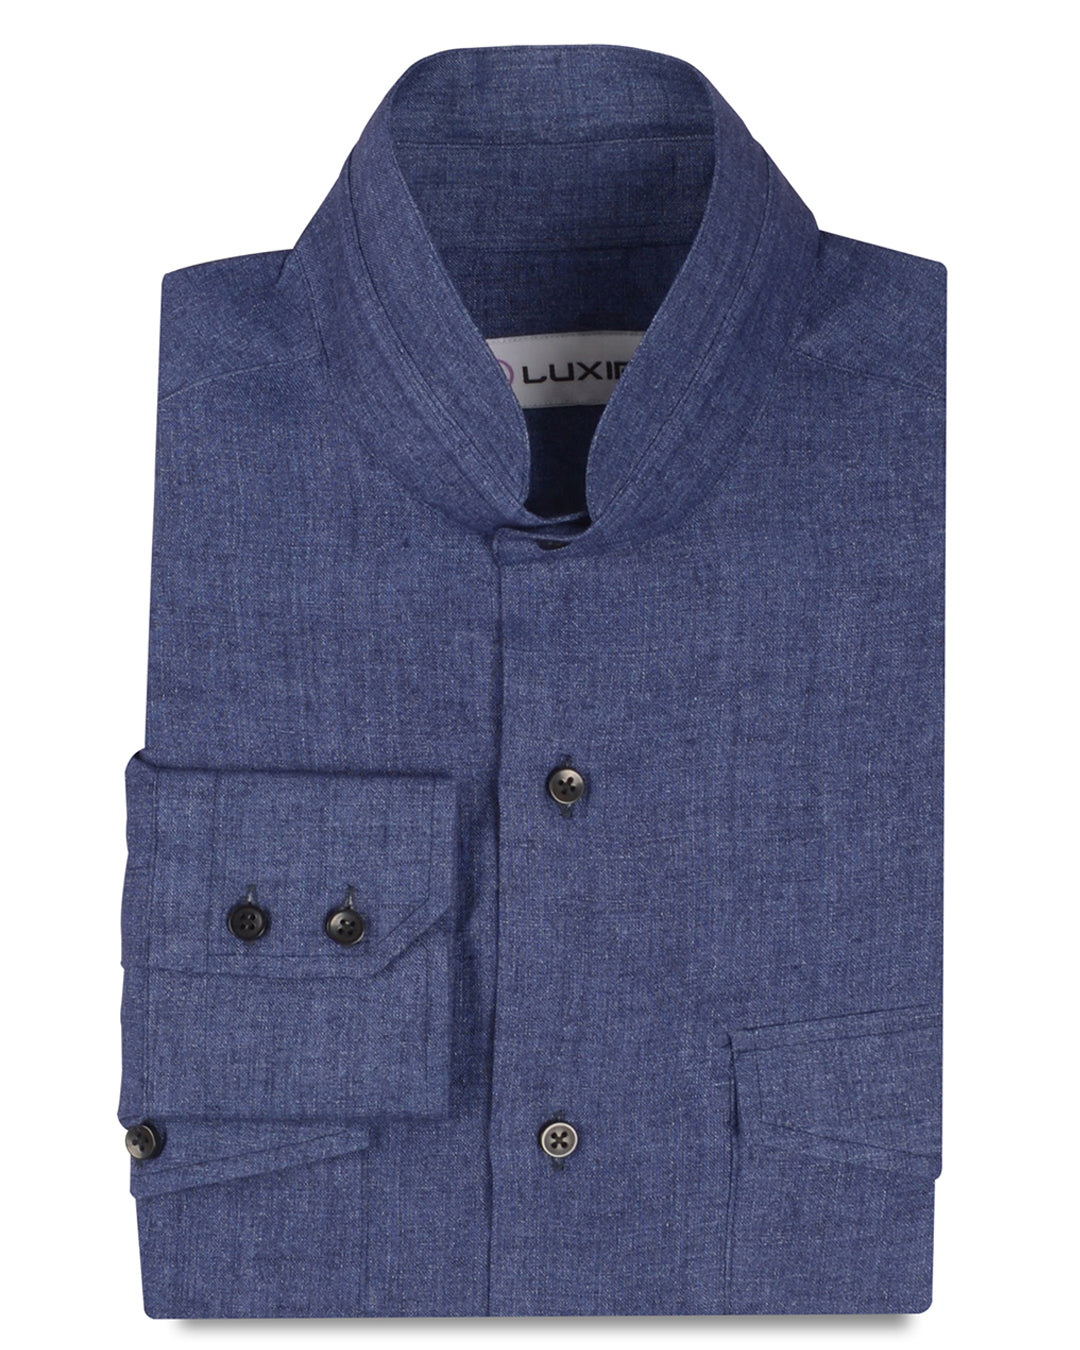 Front of the custom linen shirt for men in denim indigo blue by Luxire Clothing